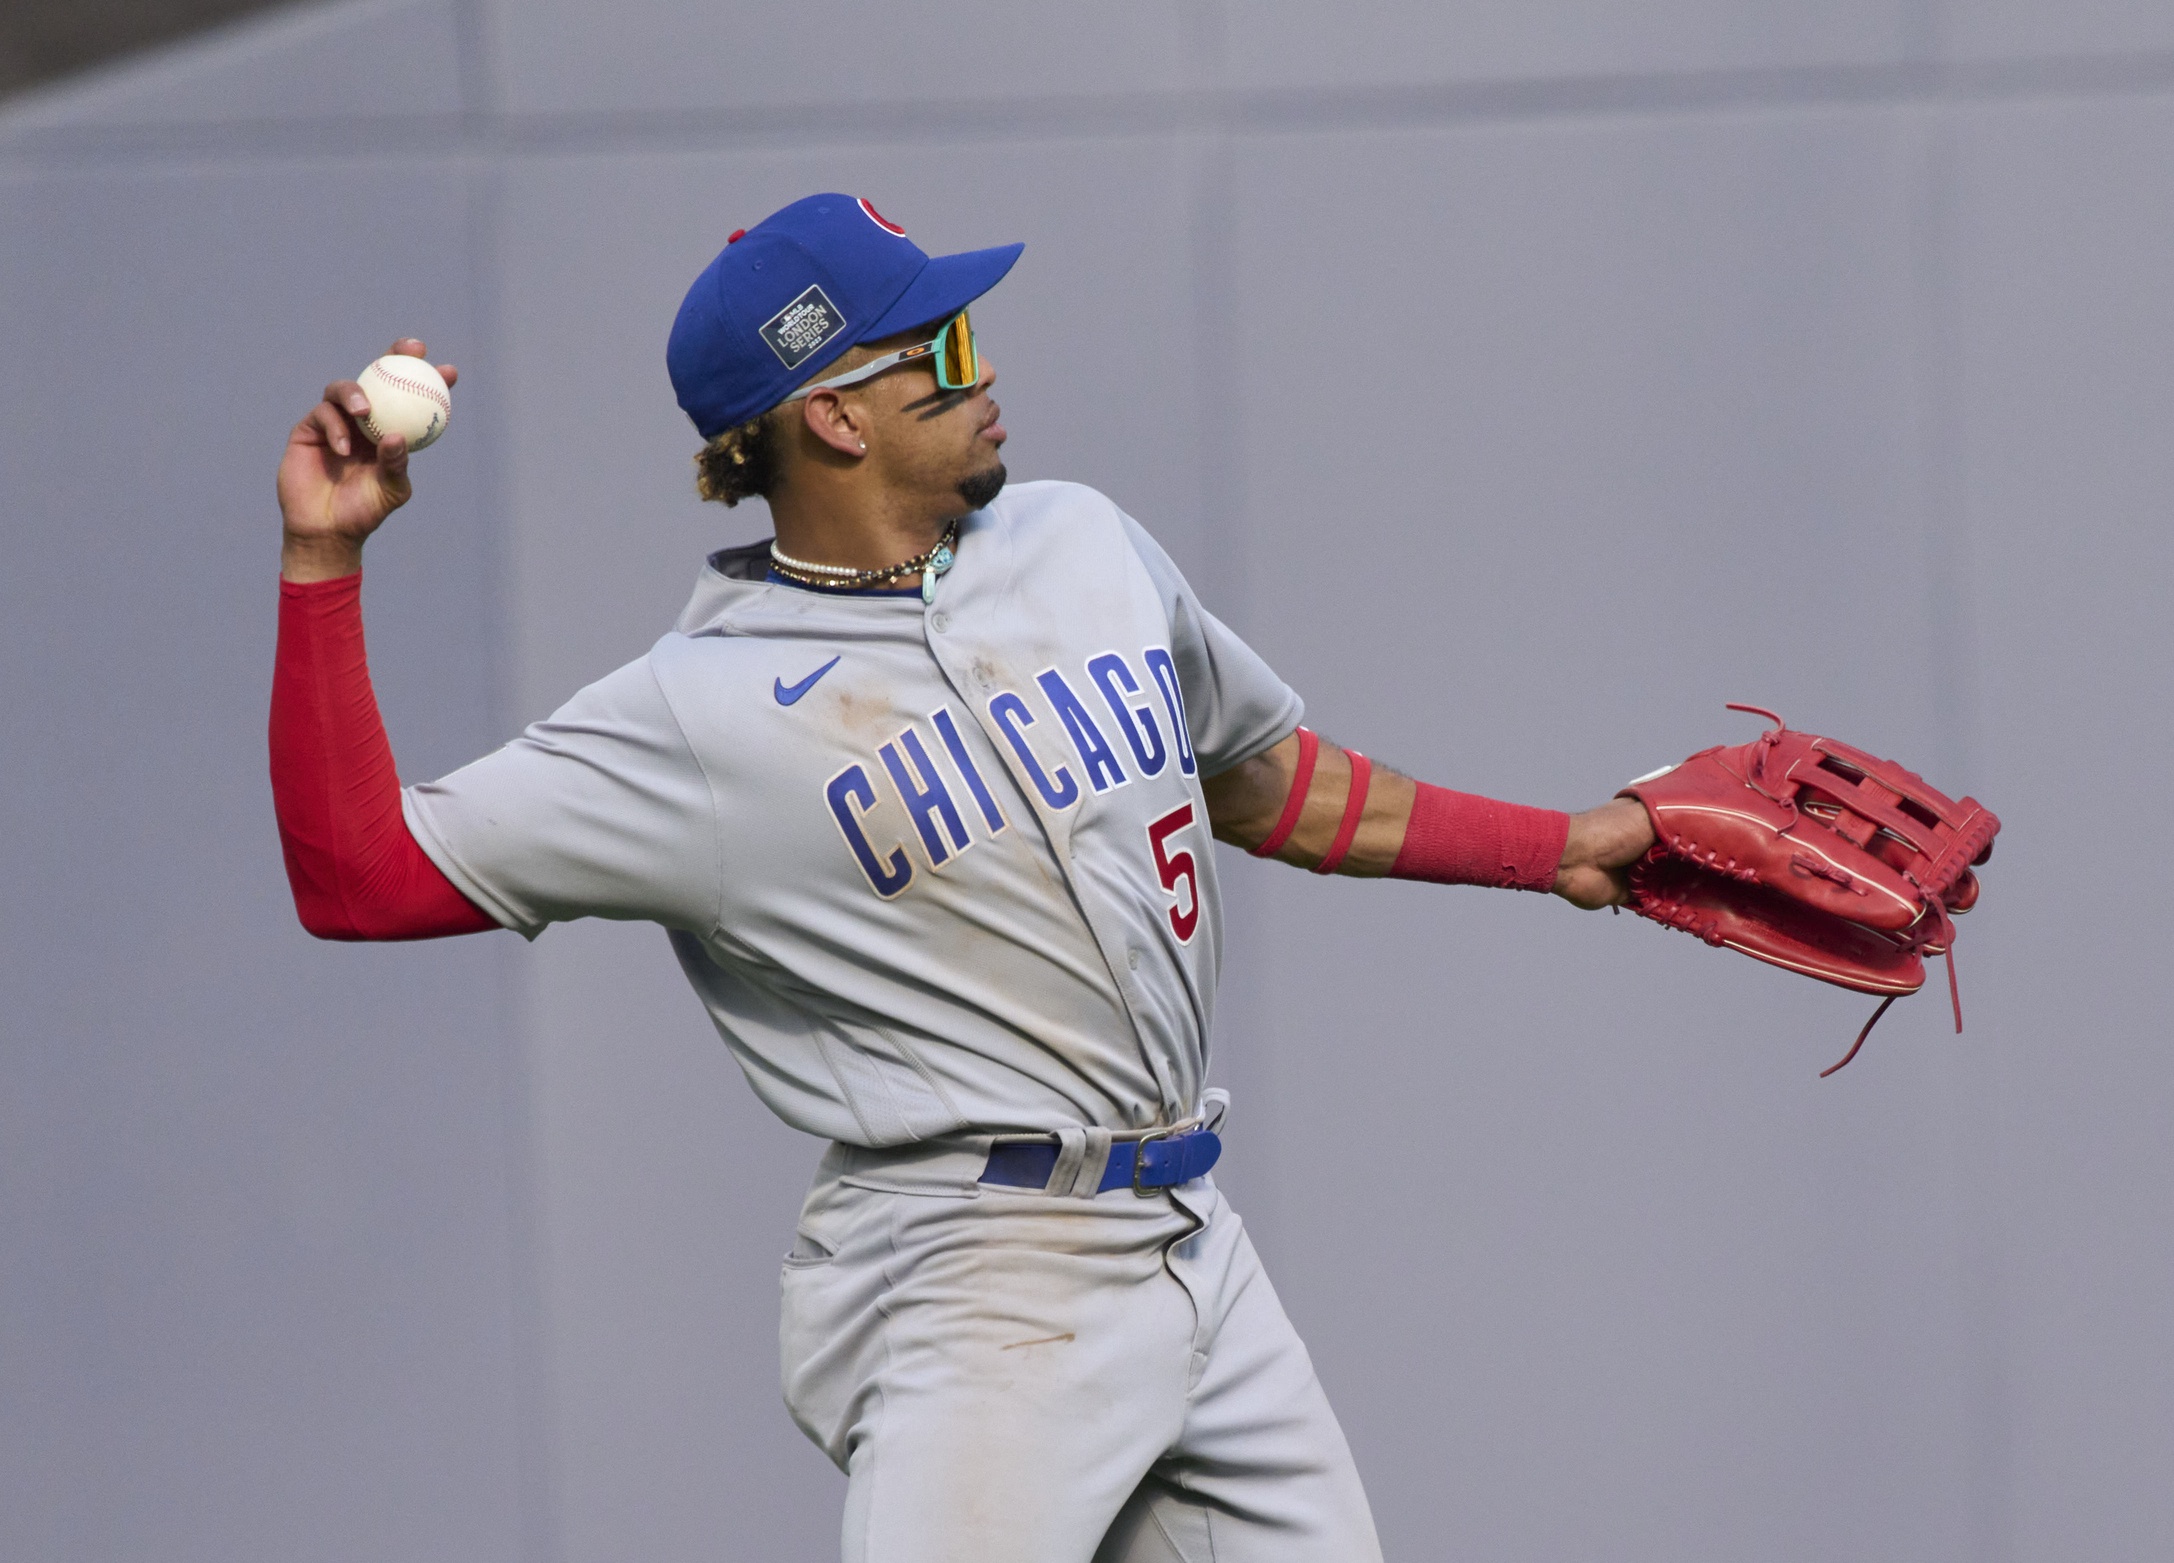 Chicago Cubs vs. St. Louis Cardinals preview, Sunday 7/23, 1:20 CT